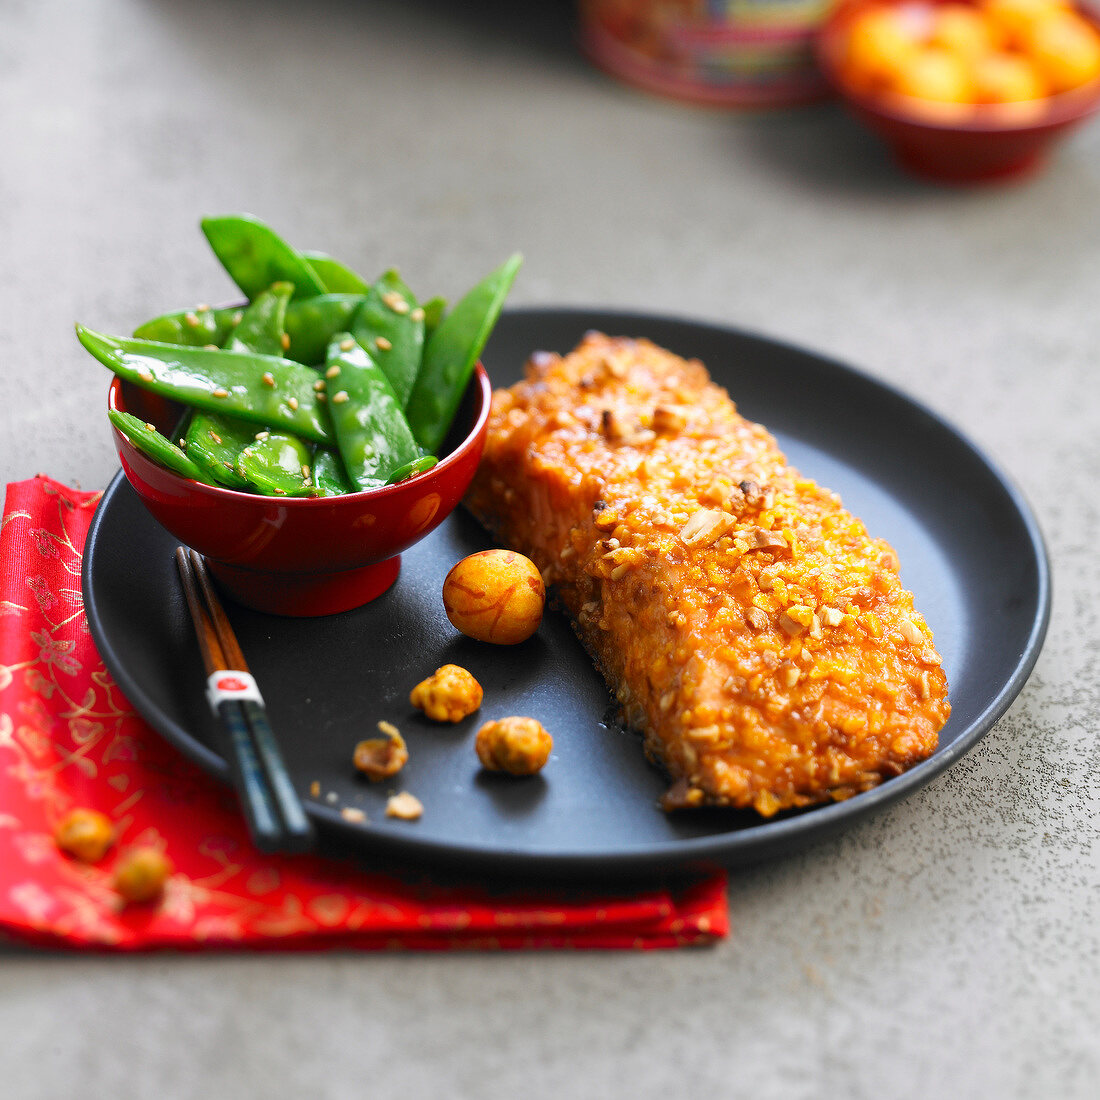 Salmon coated with crushed Japonese aperitif bites